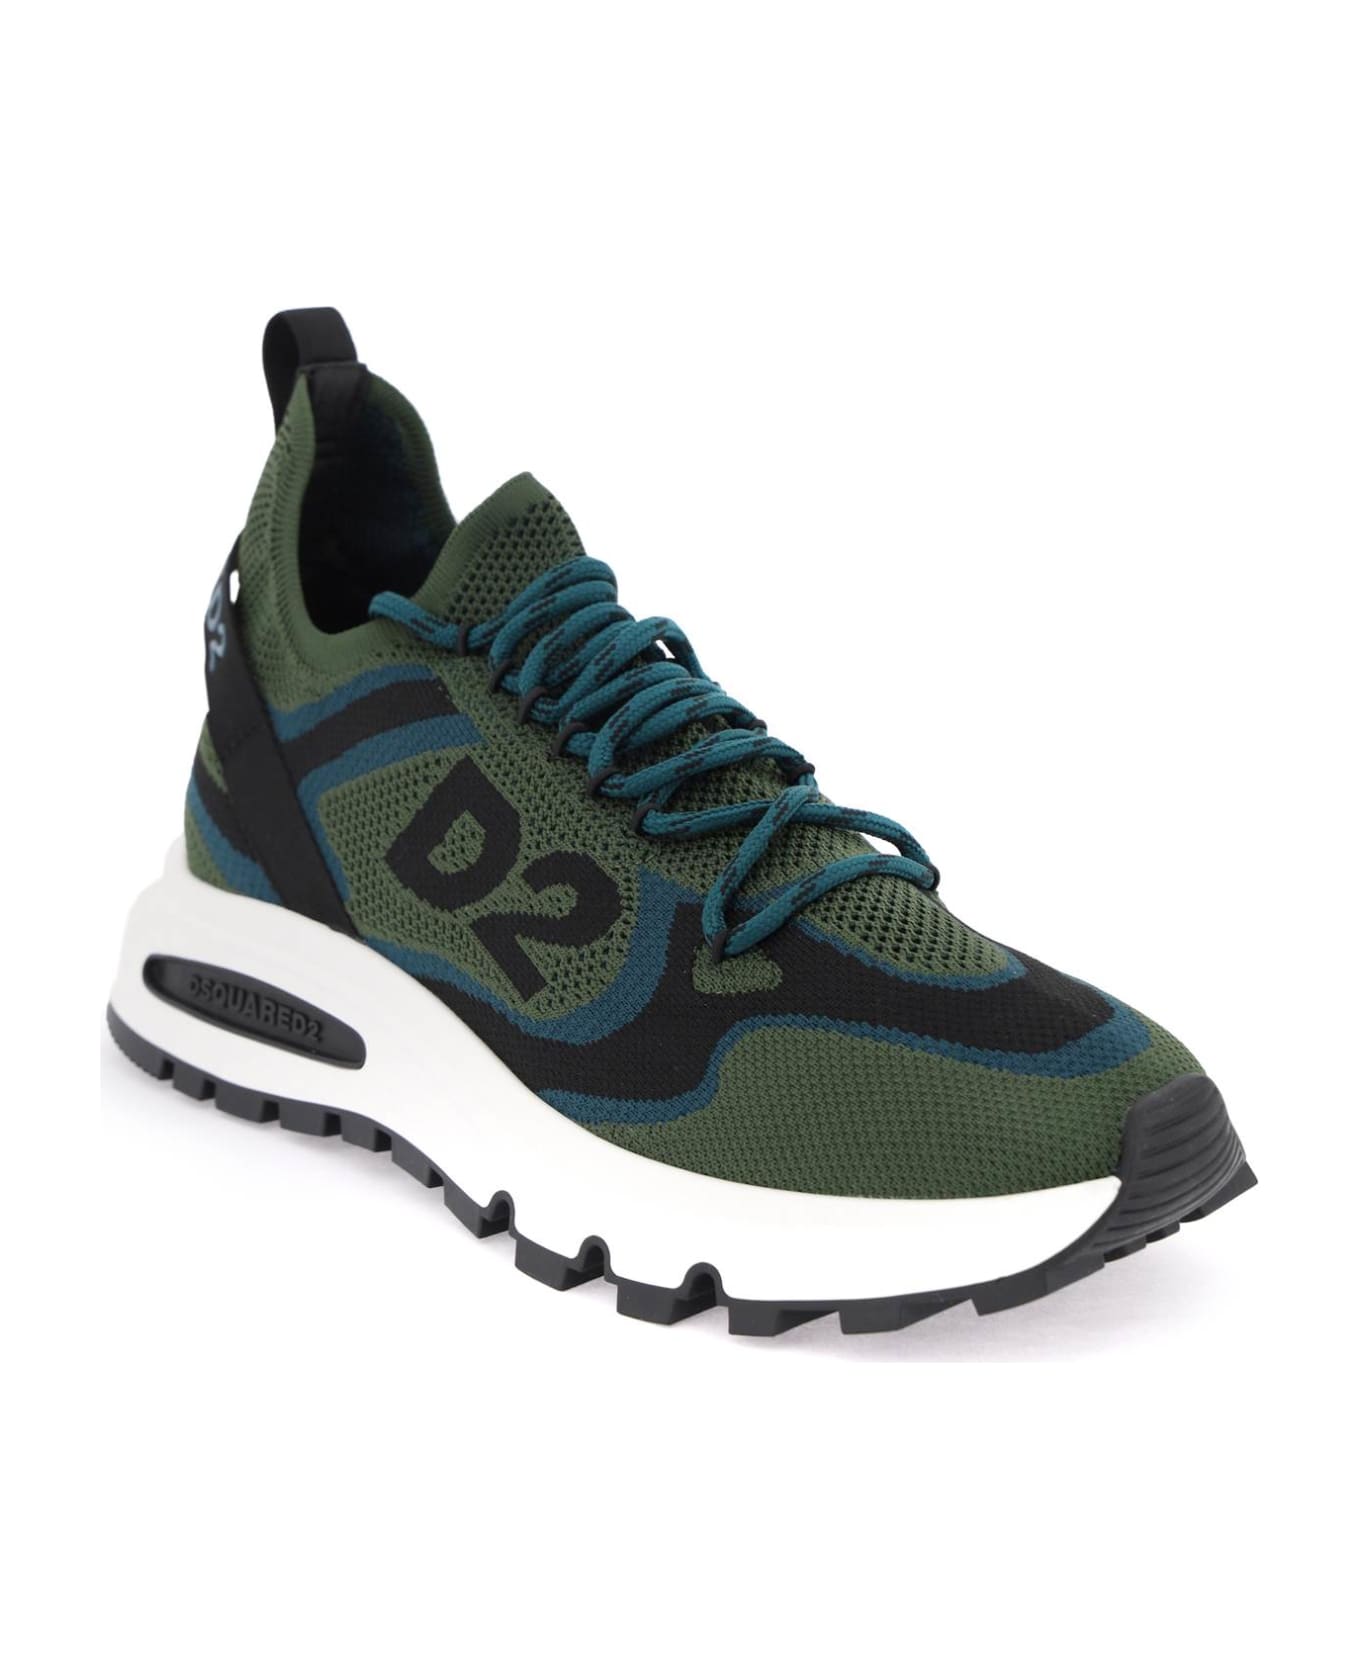 Dsquared2 Run Ds2 Sneakers - MILITARY TEAL BLACK (Black) スニーカー